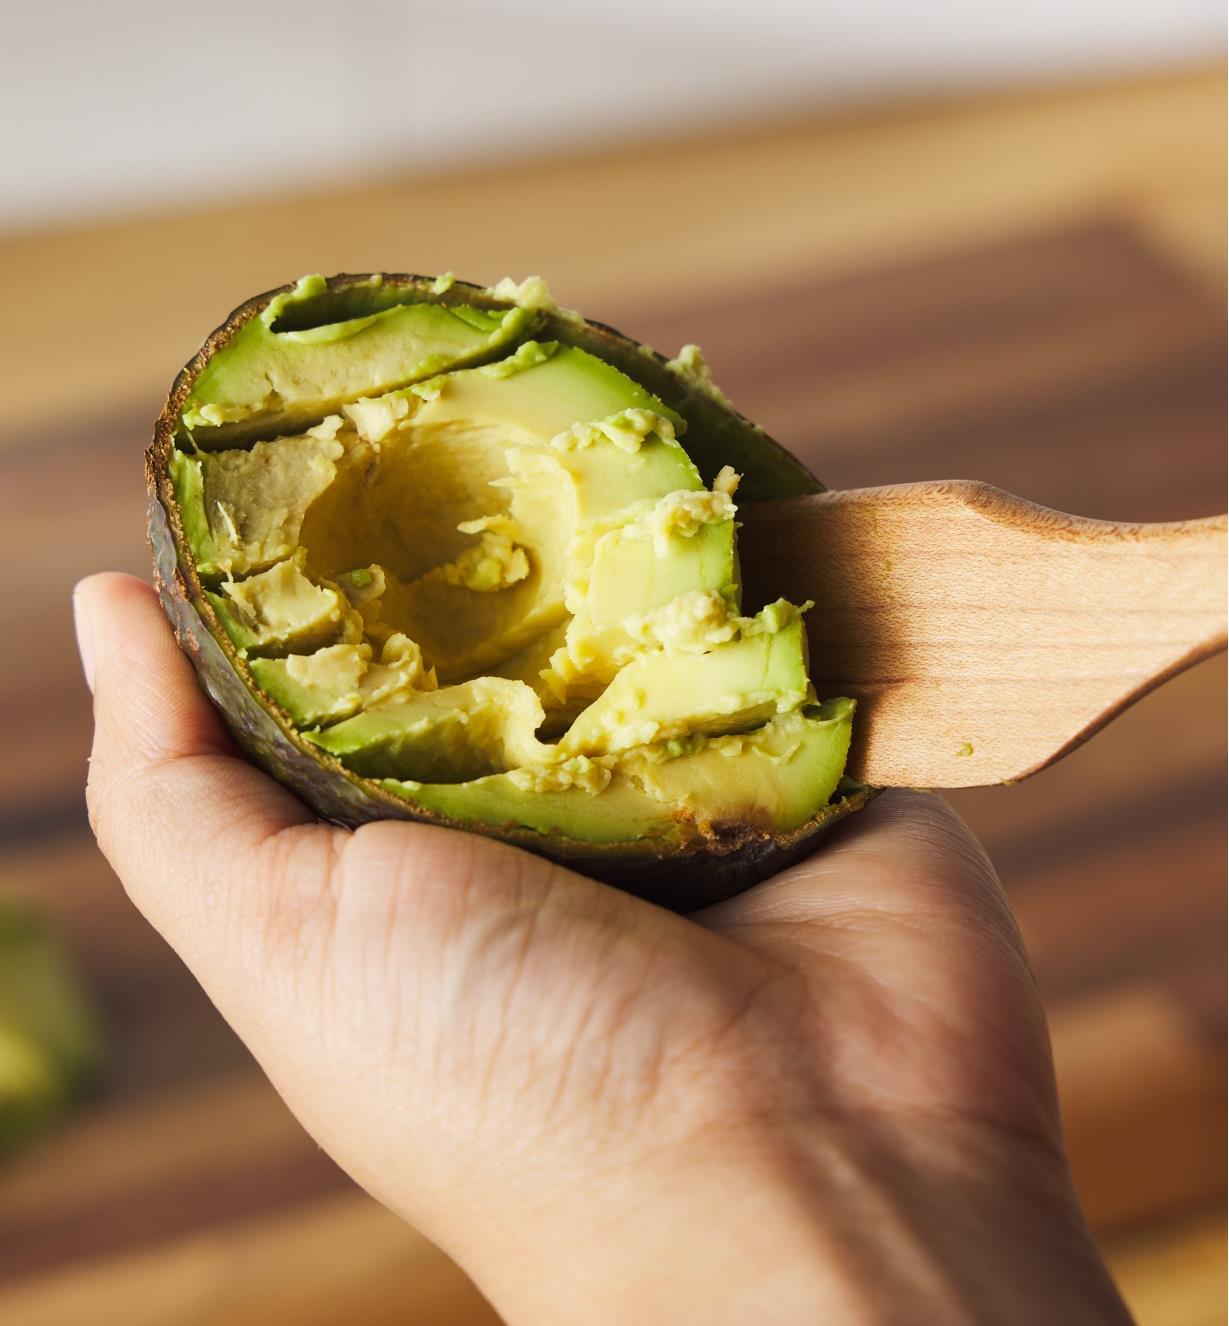 Using a Better Spreader to remove avocado from the skin